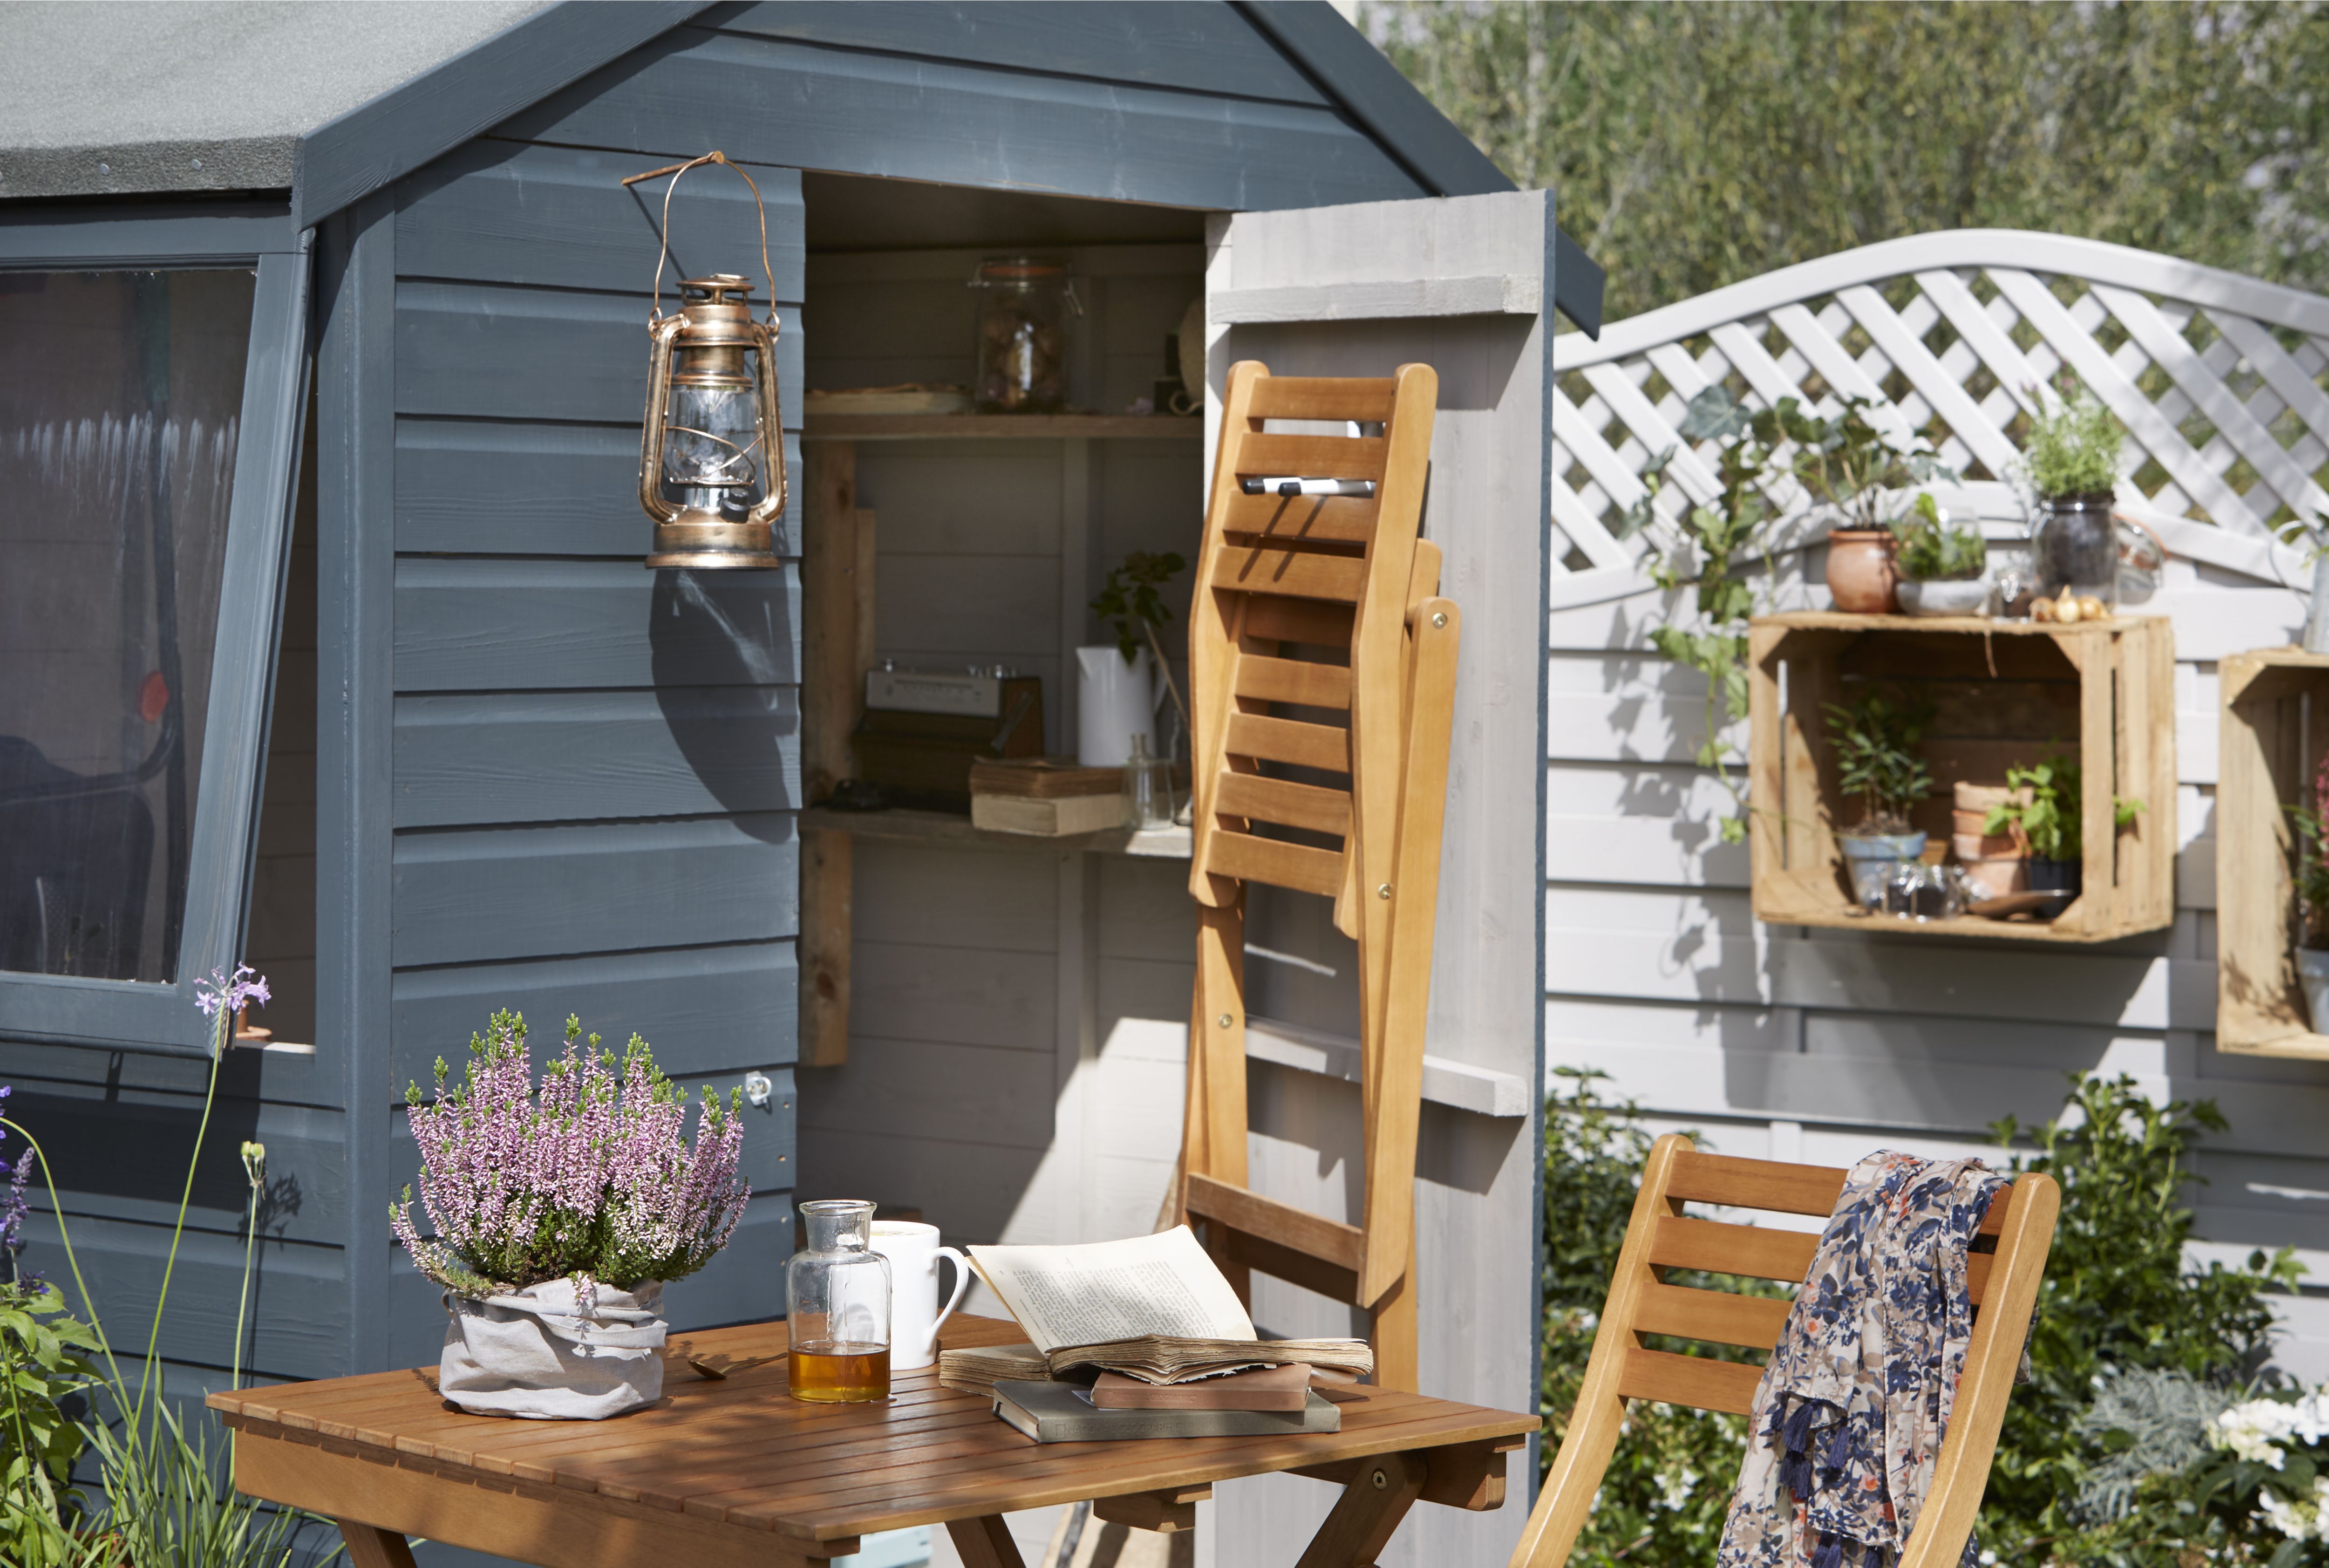 How to paint a wooden shed or fence | Ideas &amp; Advice | DIY ...